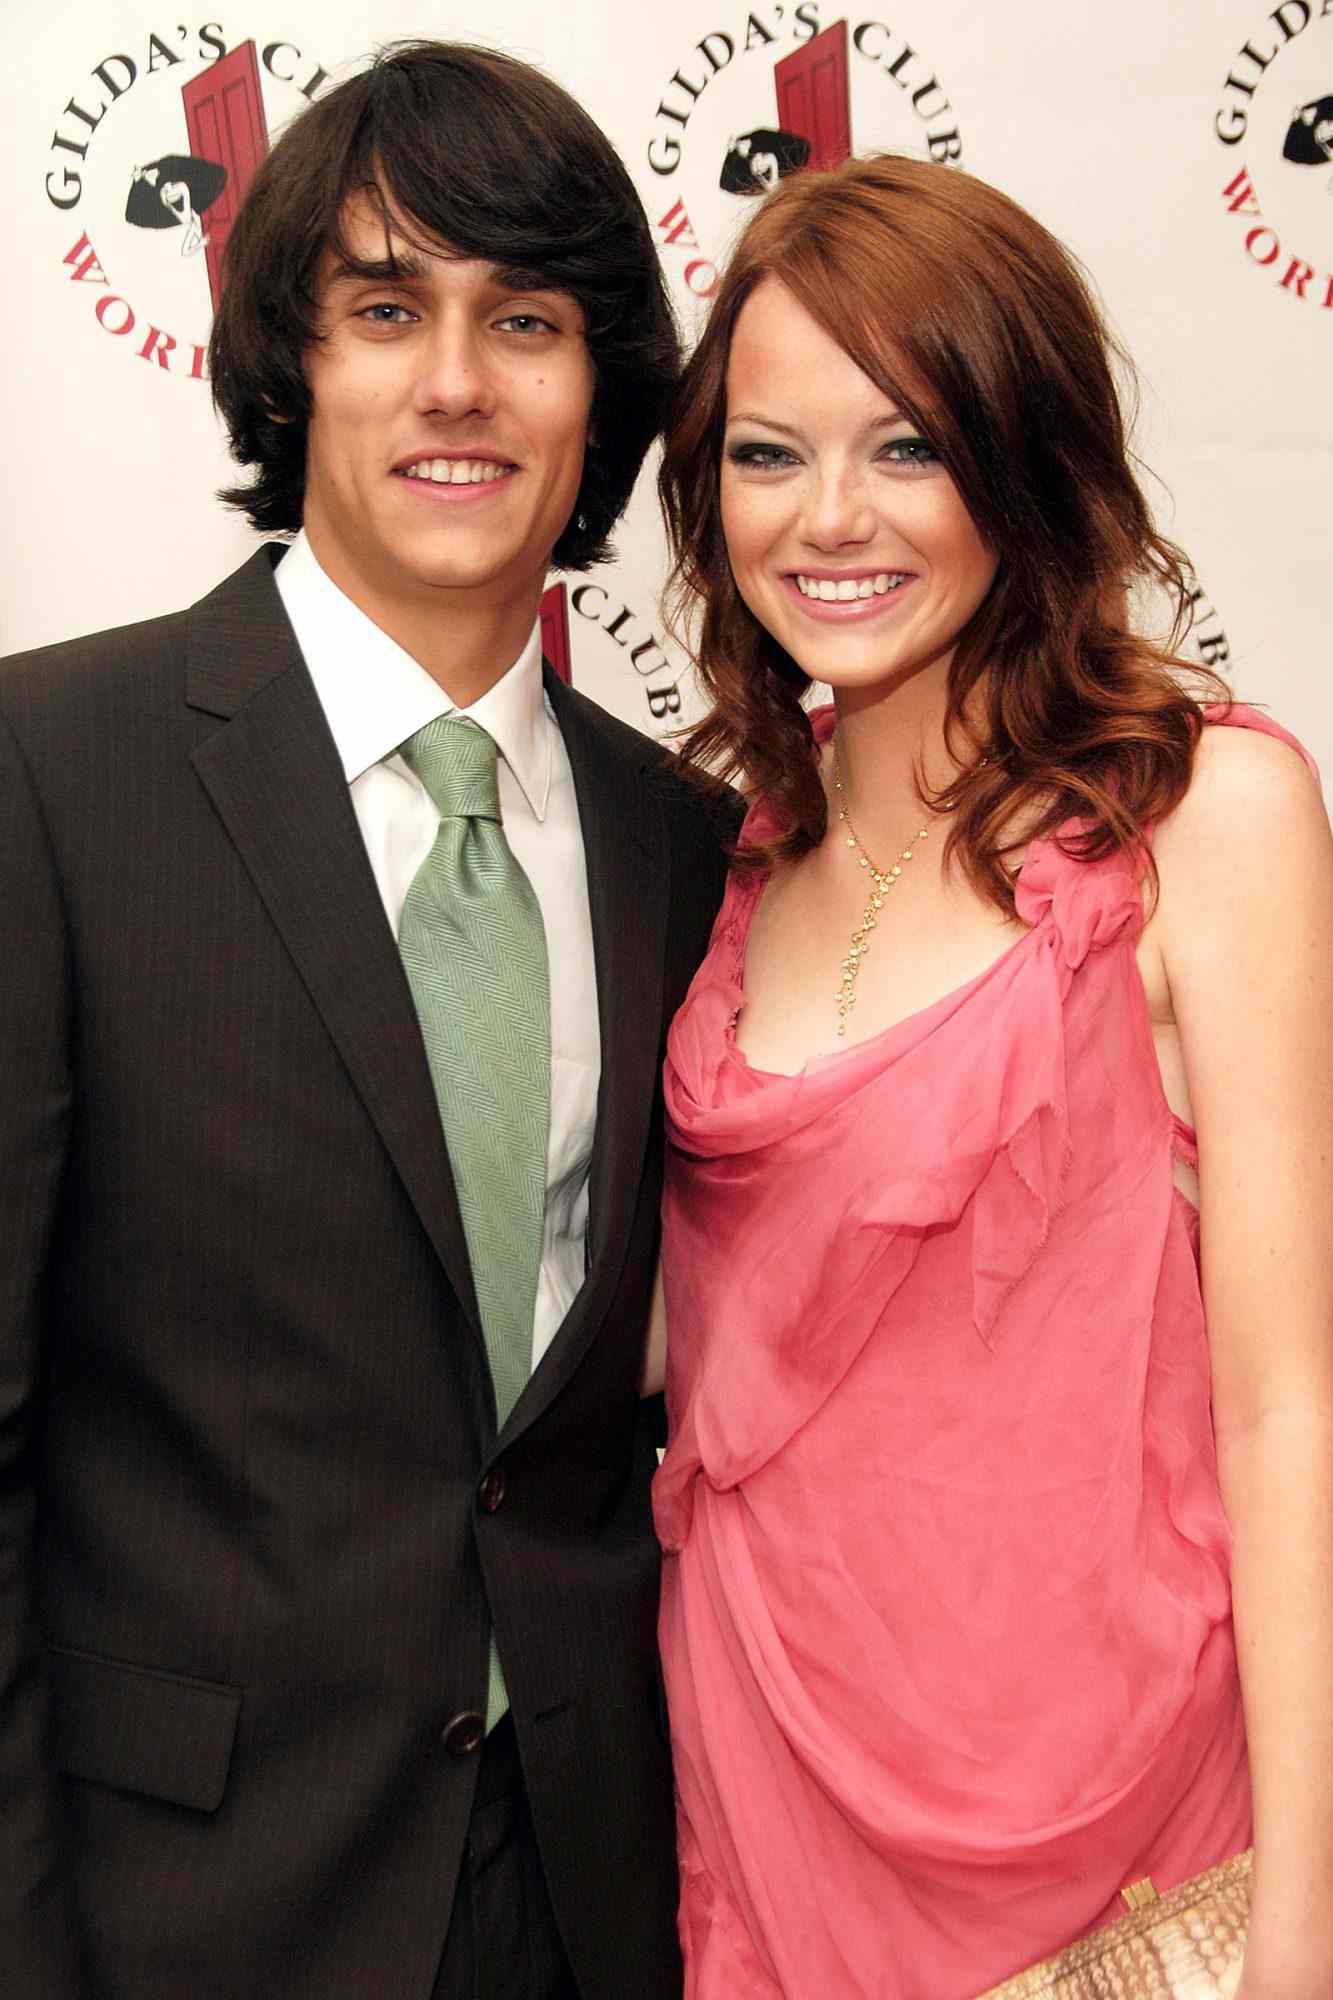 Teddy Geiger and actress Emma Stone attend the 4th annual Gilda's Club Red Ball at West Side Loft on September 19, 2008 in New York City